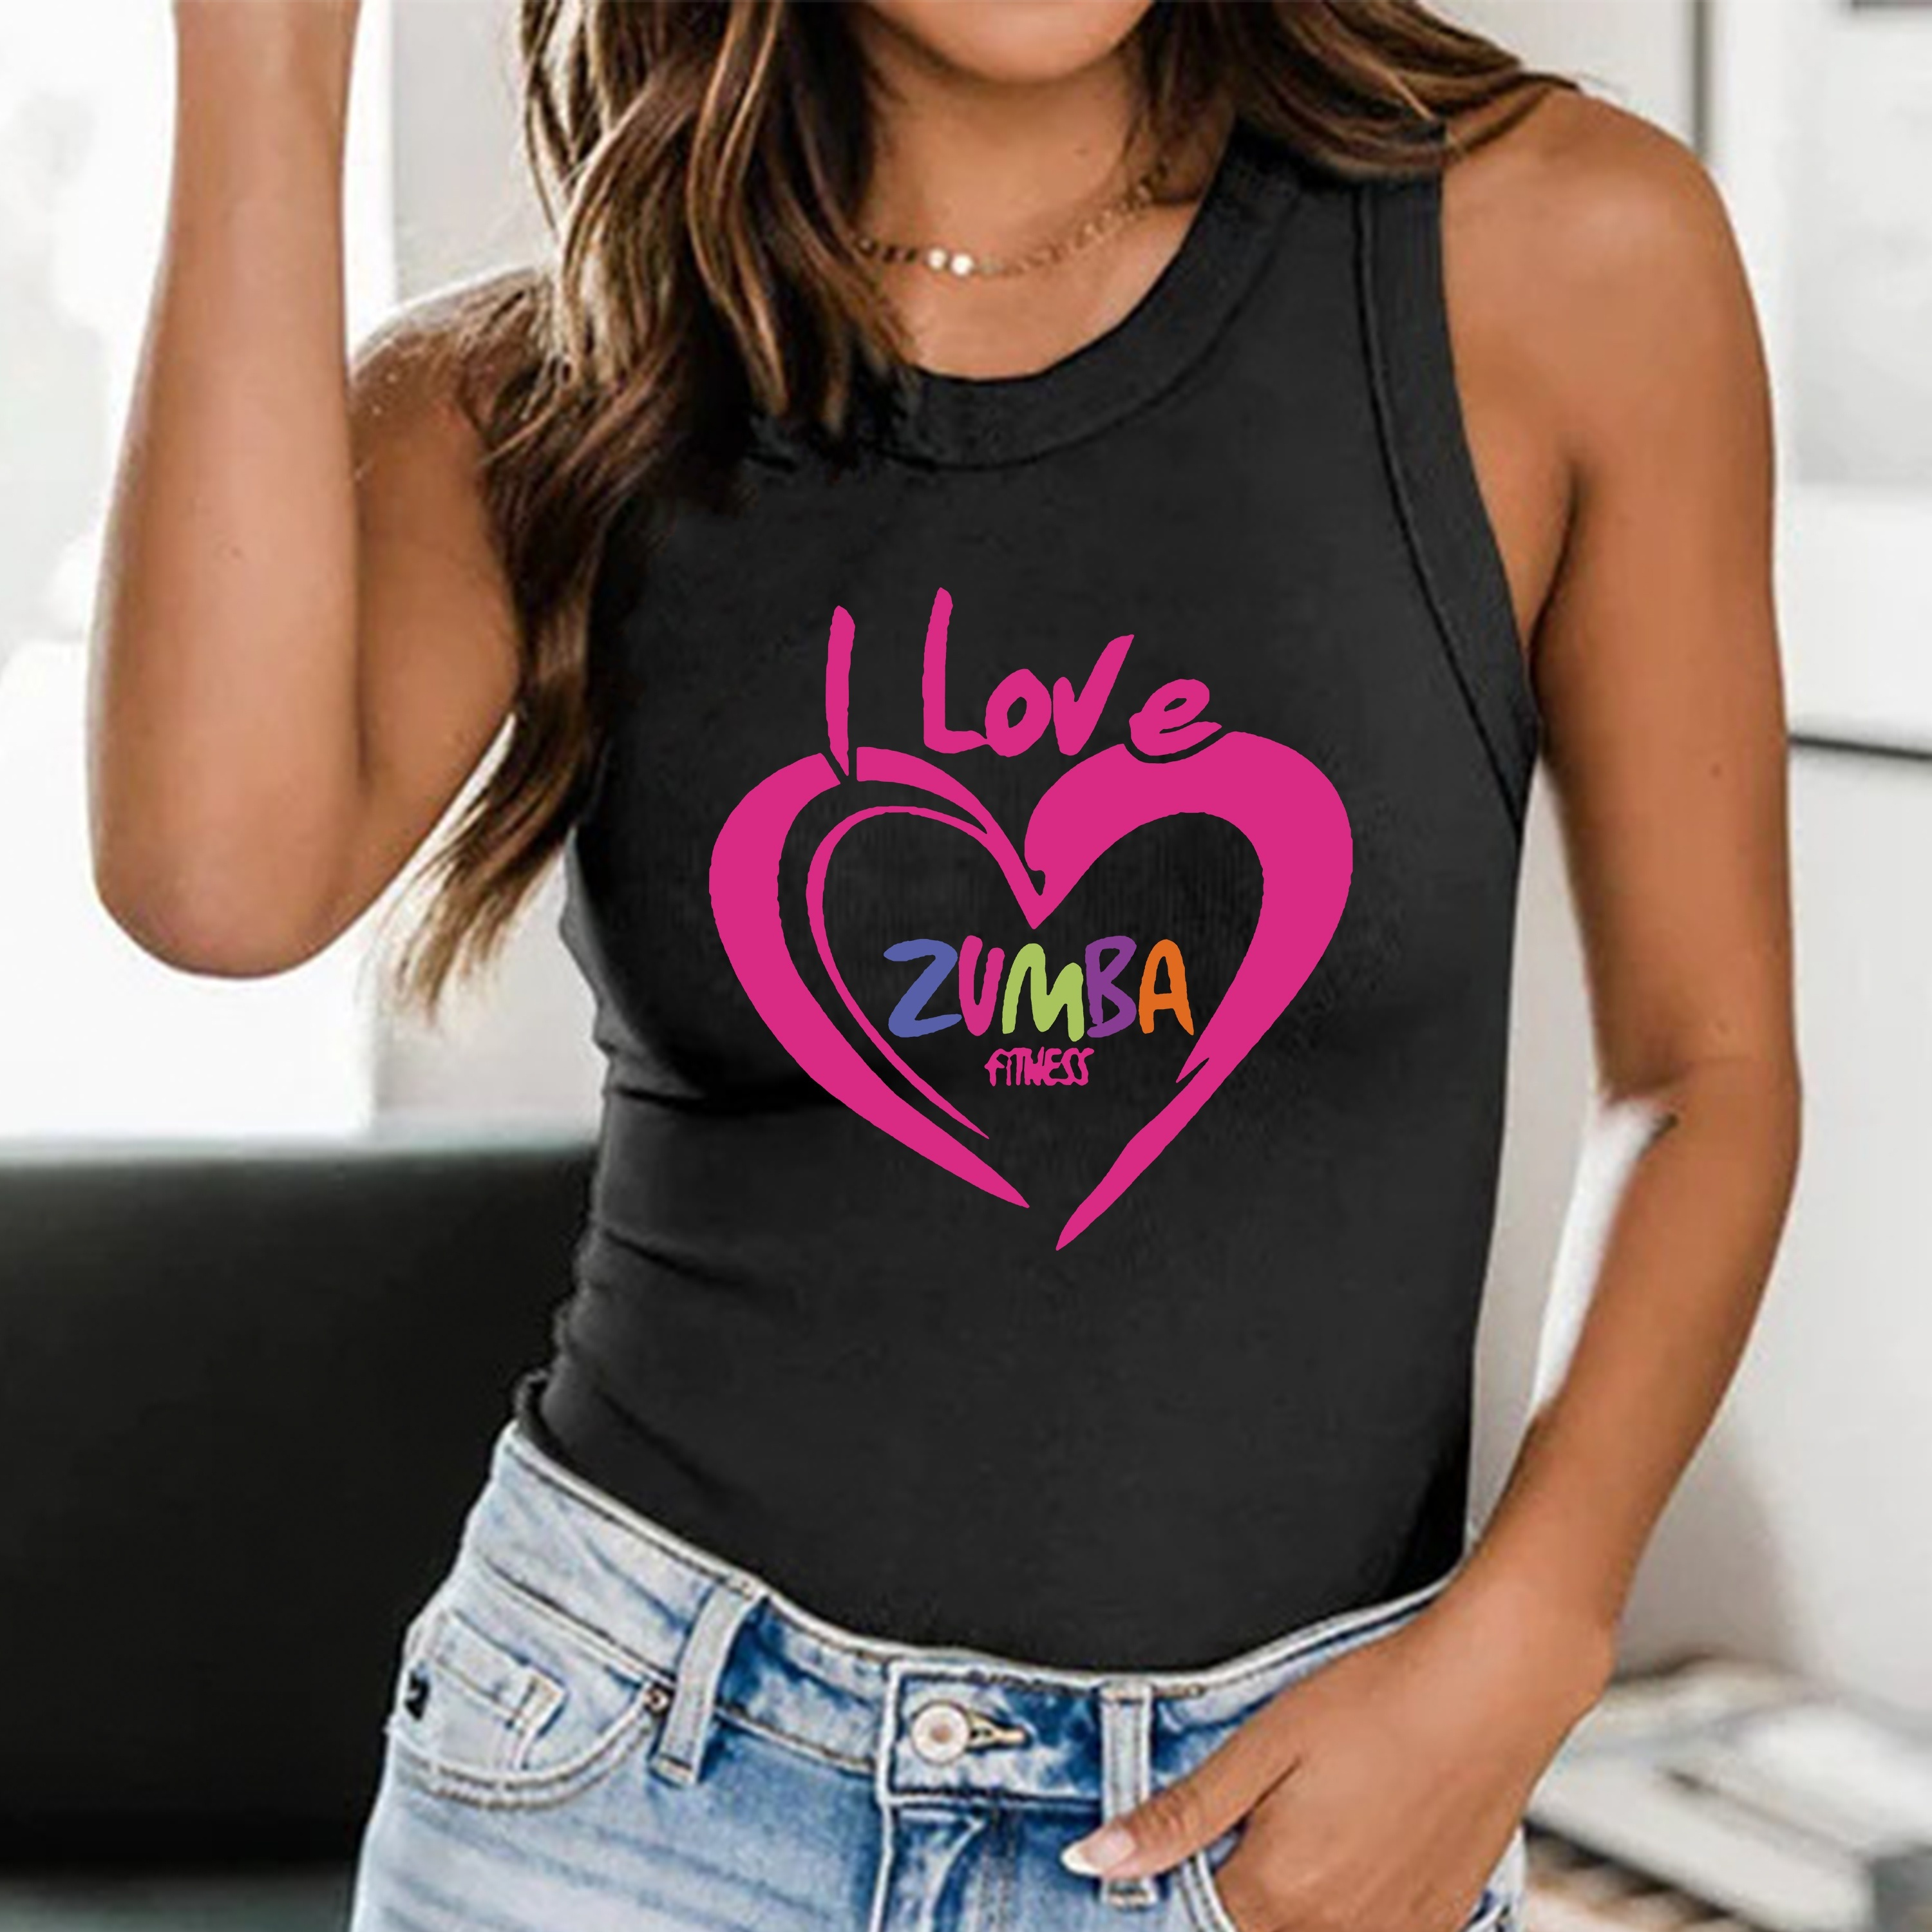 

Love Zumba Print Crew Neck Tank Top, Casual Sleeveless Top For Summer & Spring, Women's Clothing